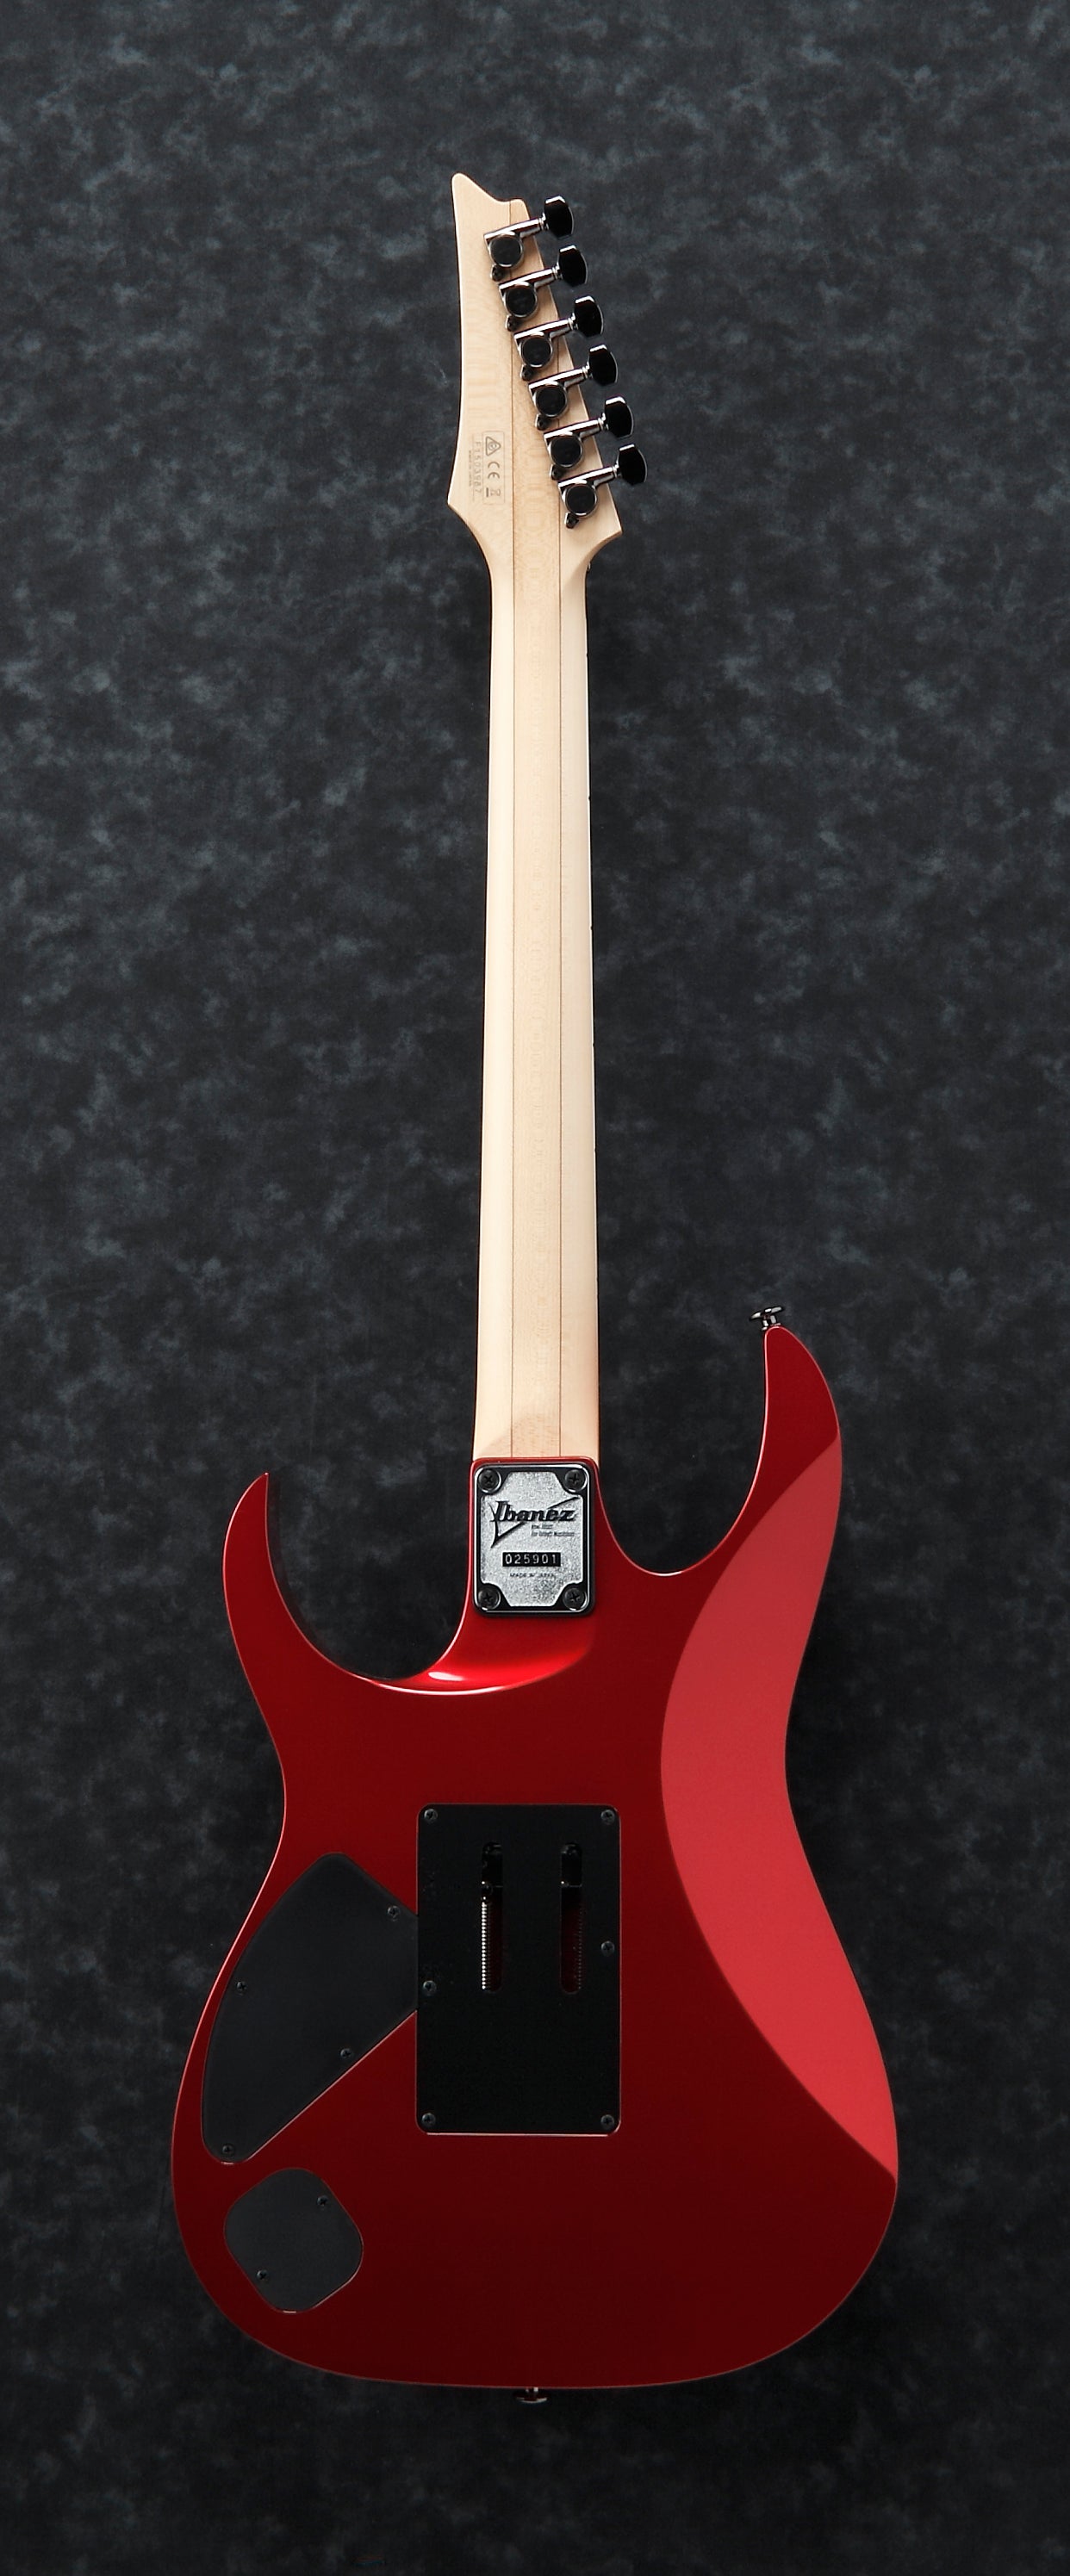 Ibanez RG3770DX CA Prestige (Candy Apple Red) Japan Made Electric Guitar 電結他